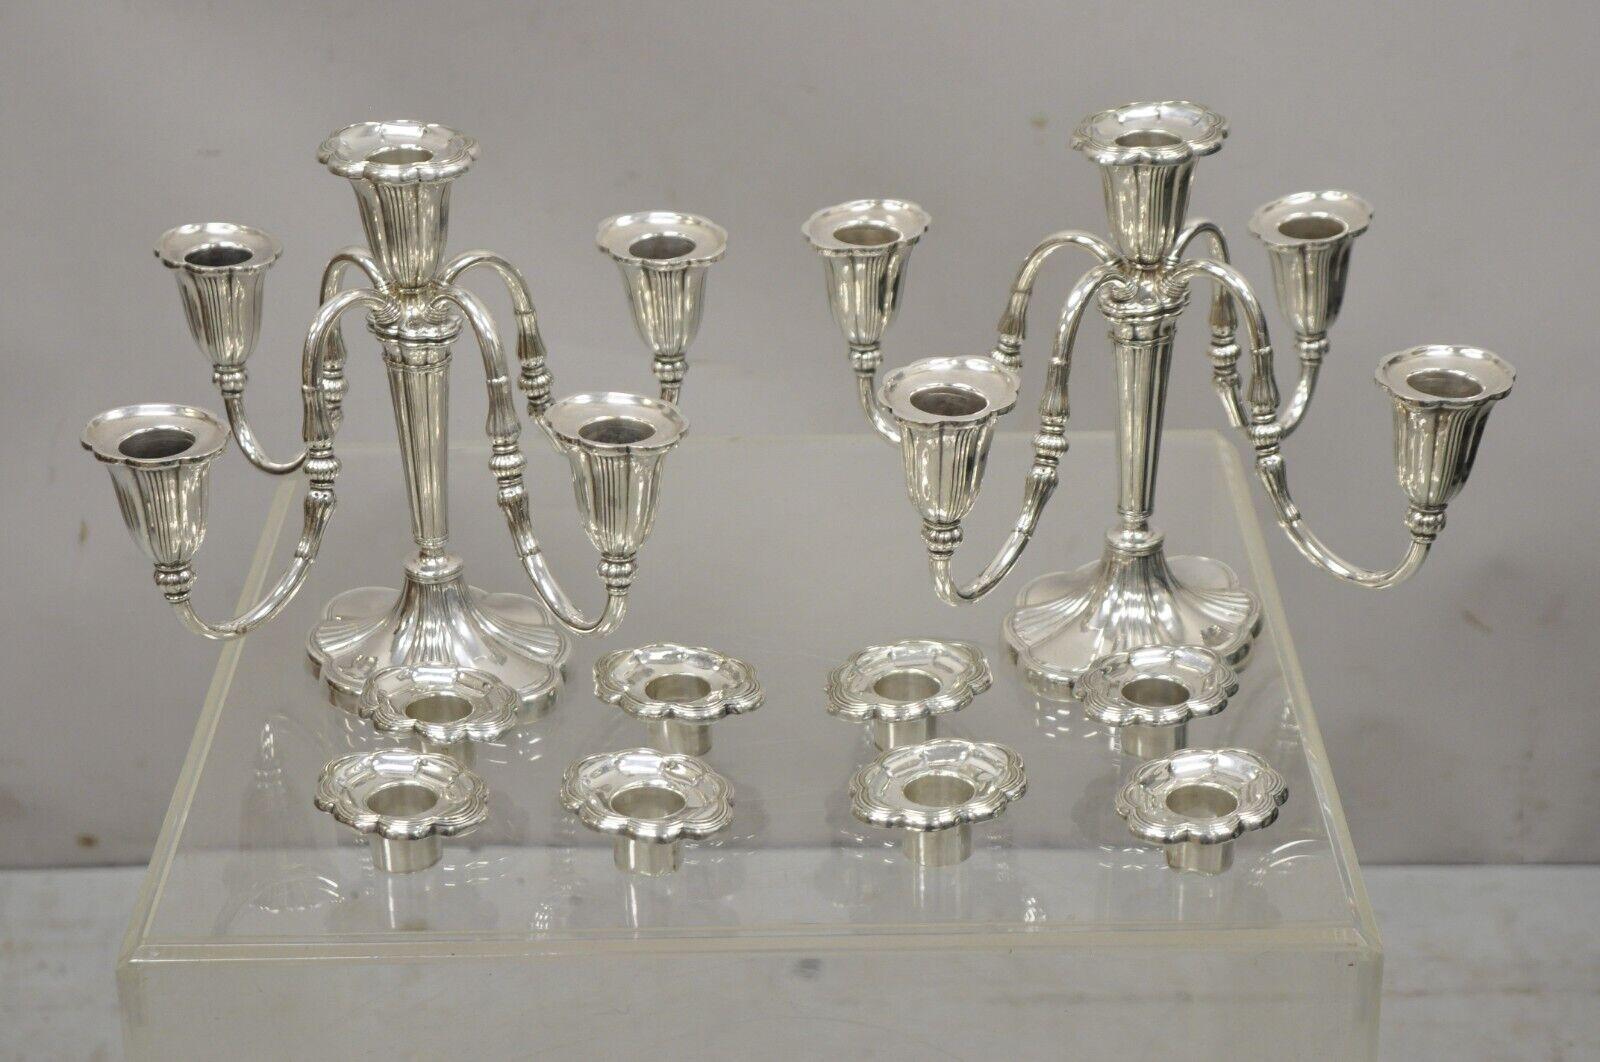 Antique GM Co. English Victorian silver plate 4 arm 5 candle candelabra - a pair. Item features 5 removable candle holder inserts, 4 scrolling arms, one central candle holder, 5 candle holders in total, original stamp, very nice antique pair,